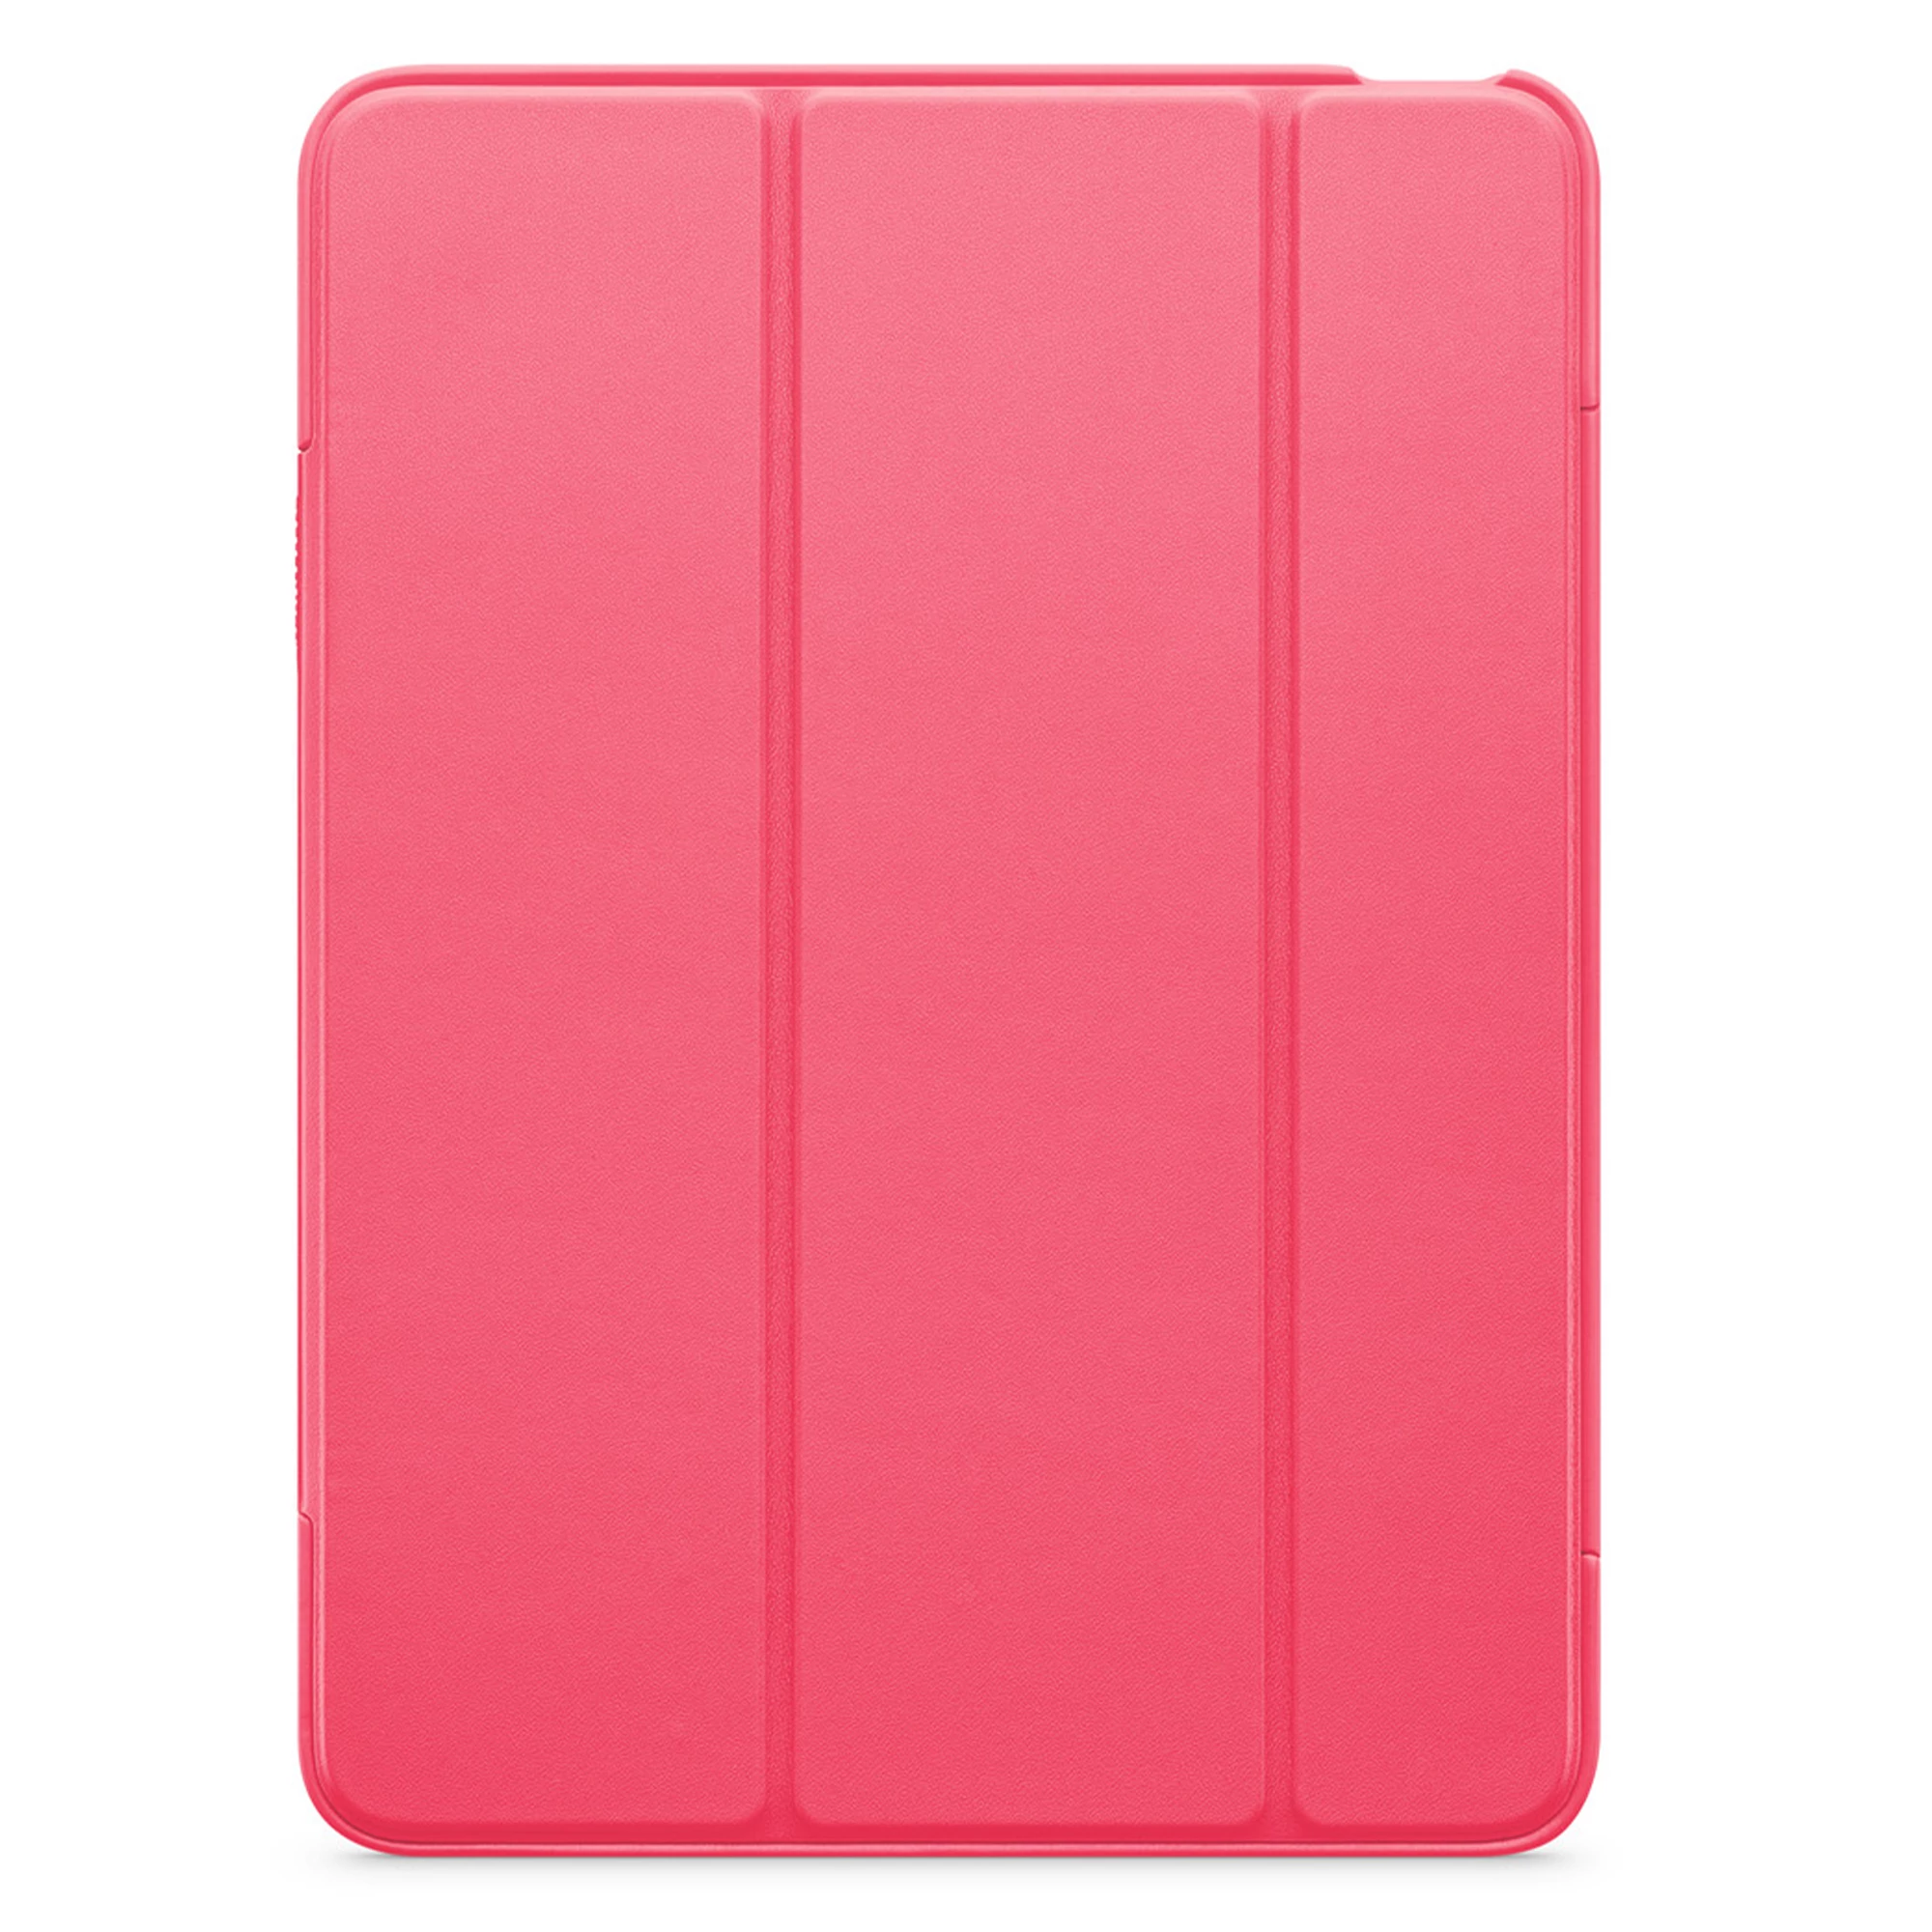 OtterBox Symmetry Series 360 Elite Case Case for iPad Air (4th and 5th generation) - Pink (HPZC2)